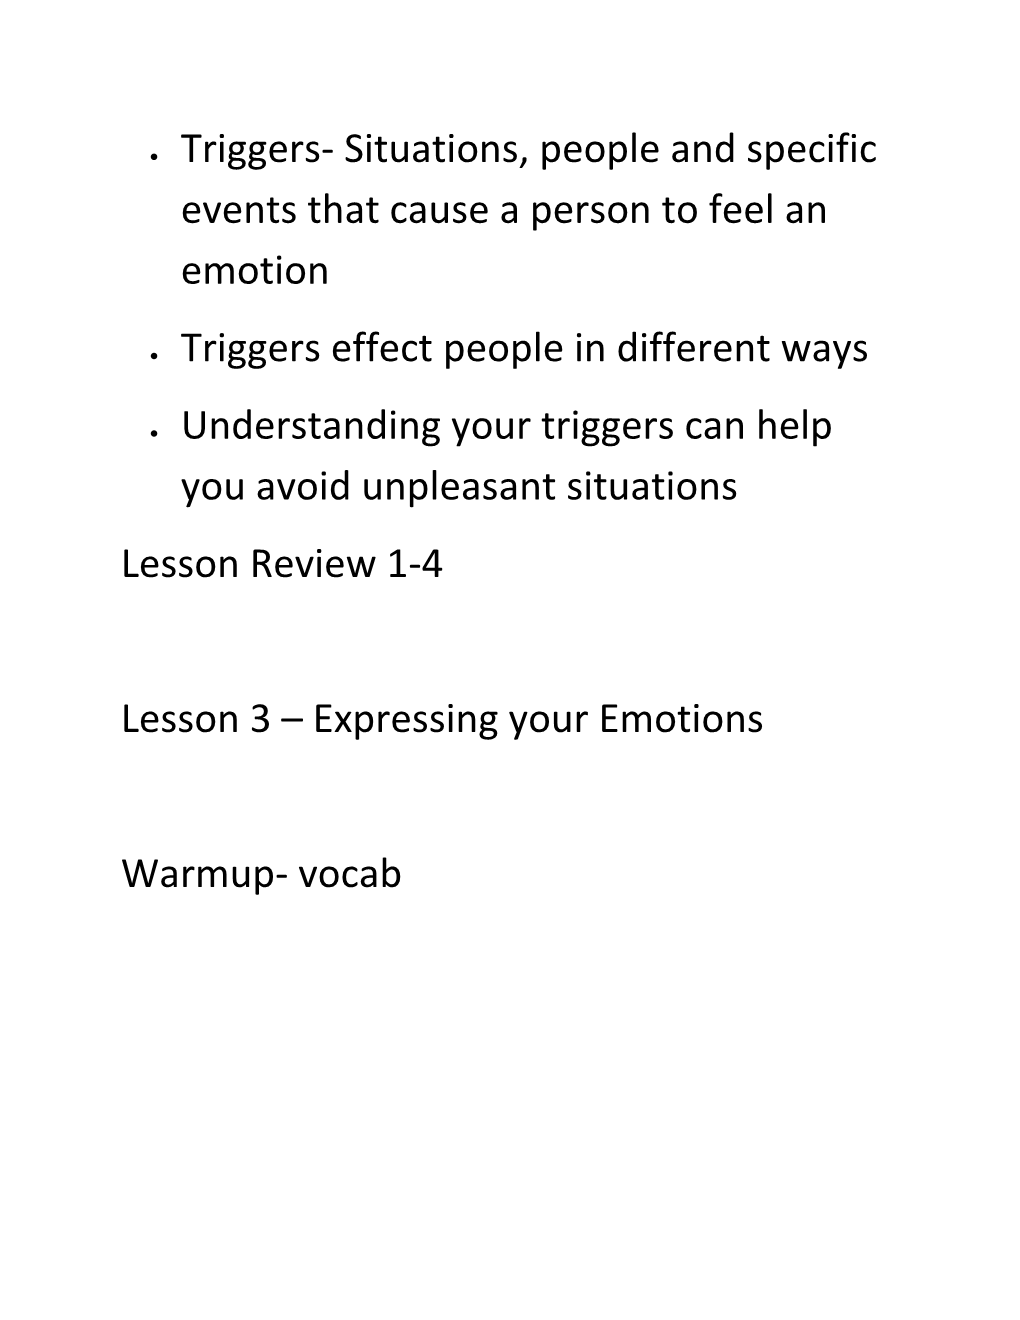 Chapter 4- Managing Mental and Emotional Health